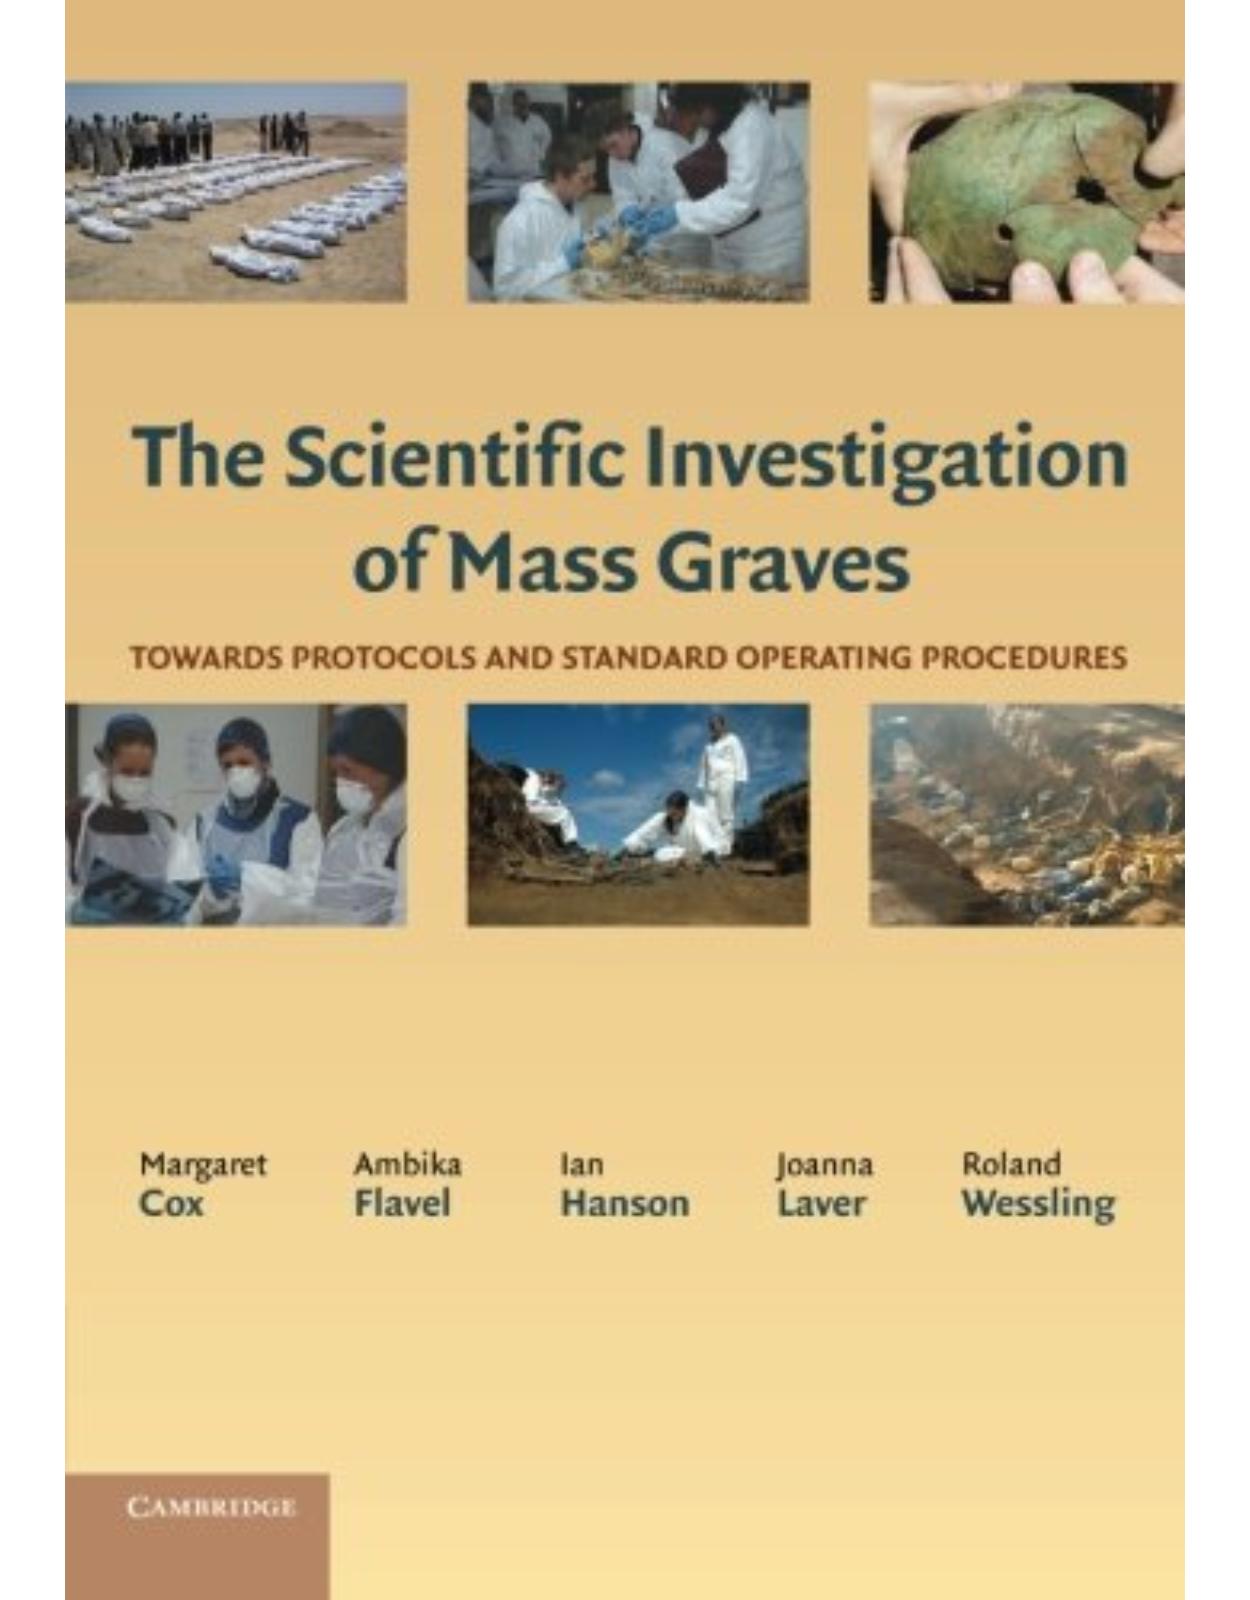 The Scientific Investigation of Mass Graves: Towards Protocols and Standard Operating Procedures